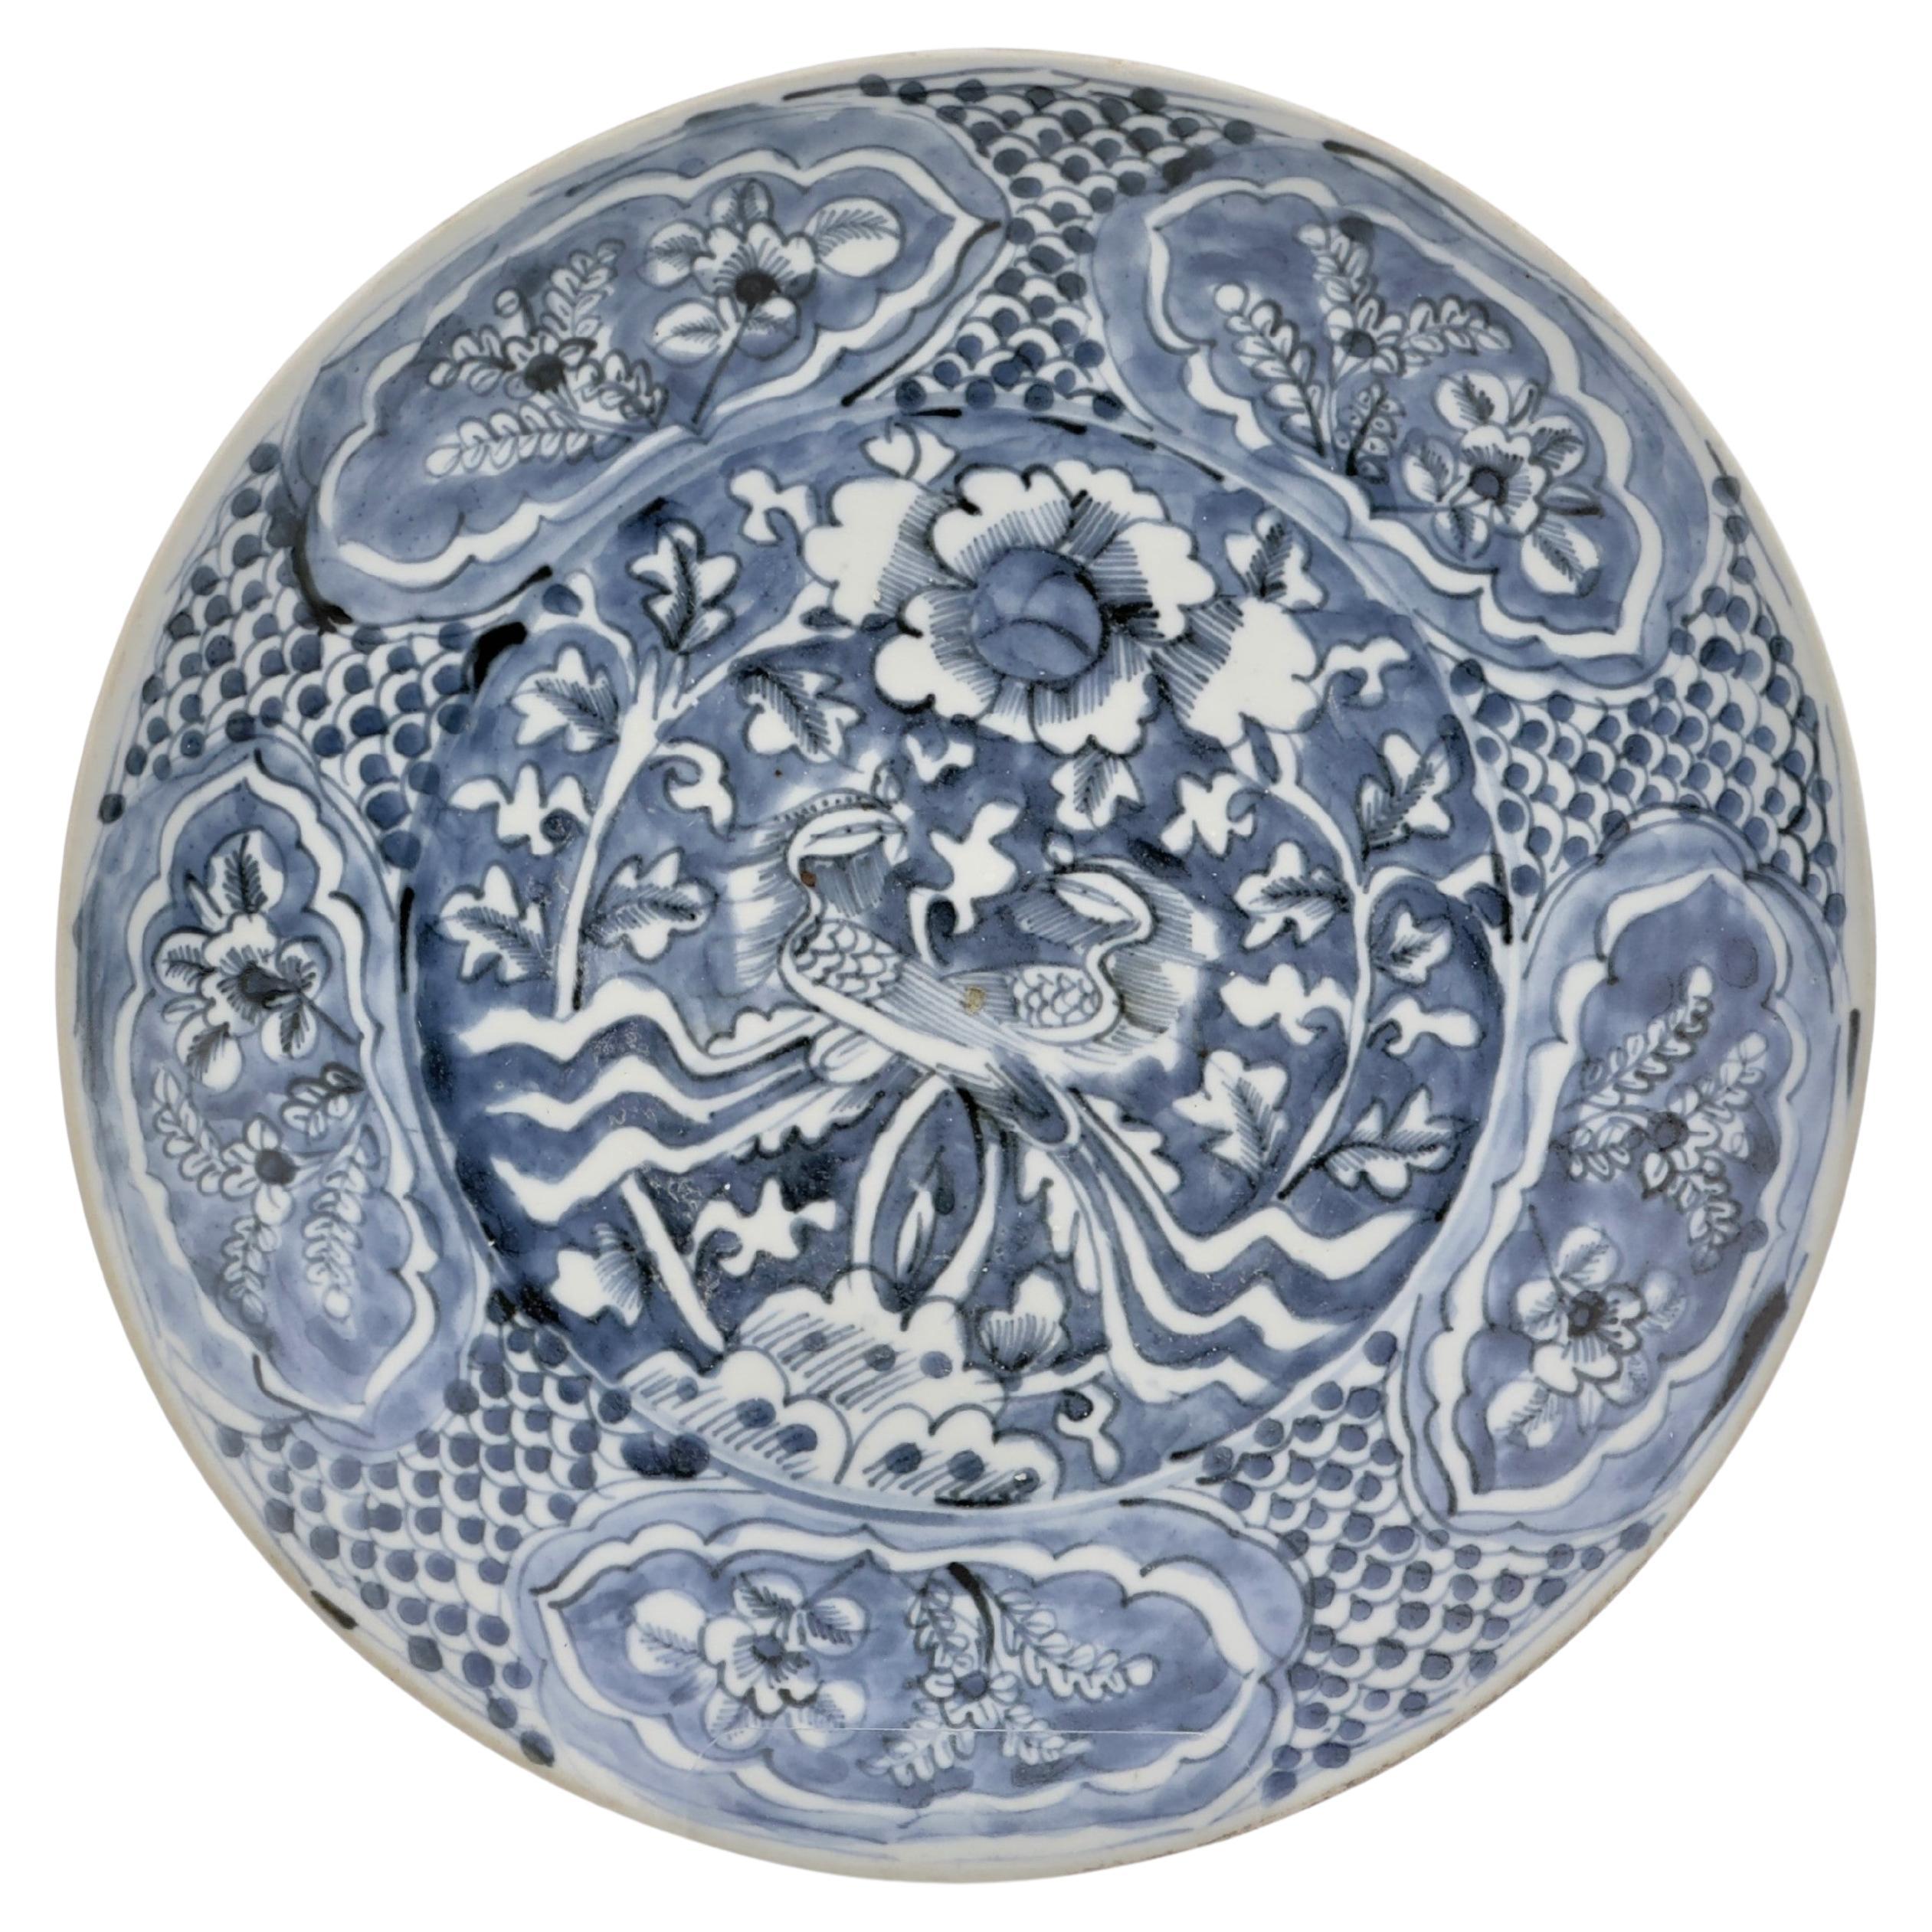 Chinese Swatow Blue and White Ceramic Dish, Late Ming Dynasty